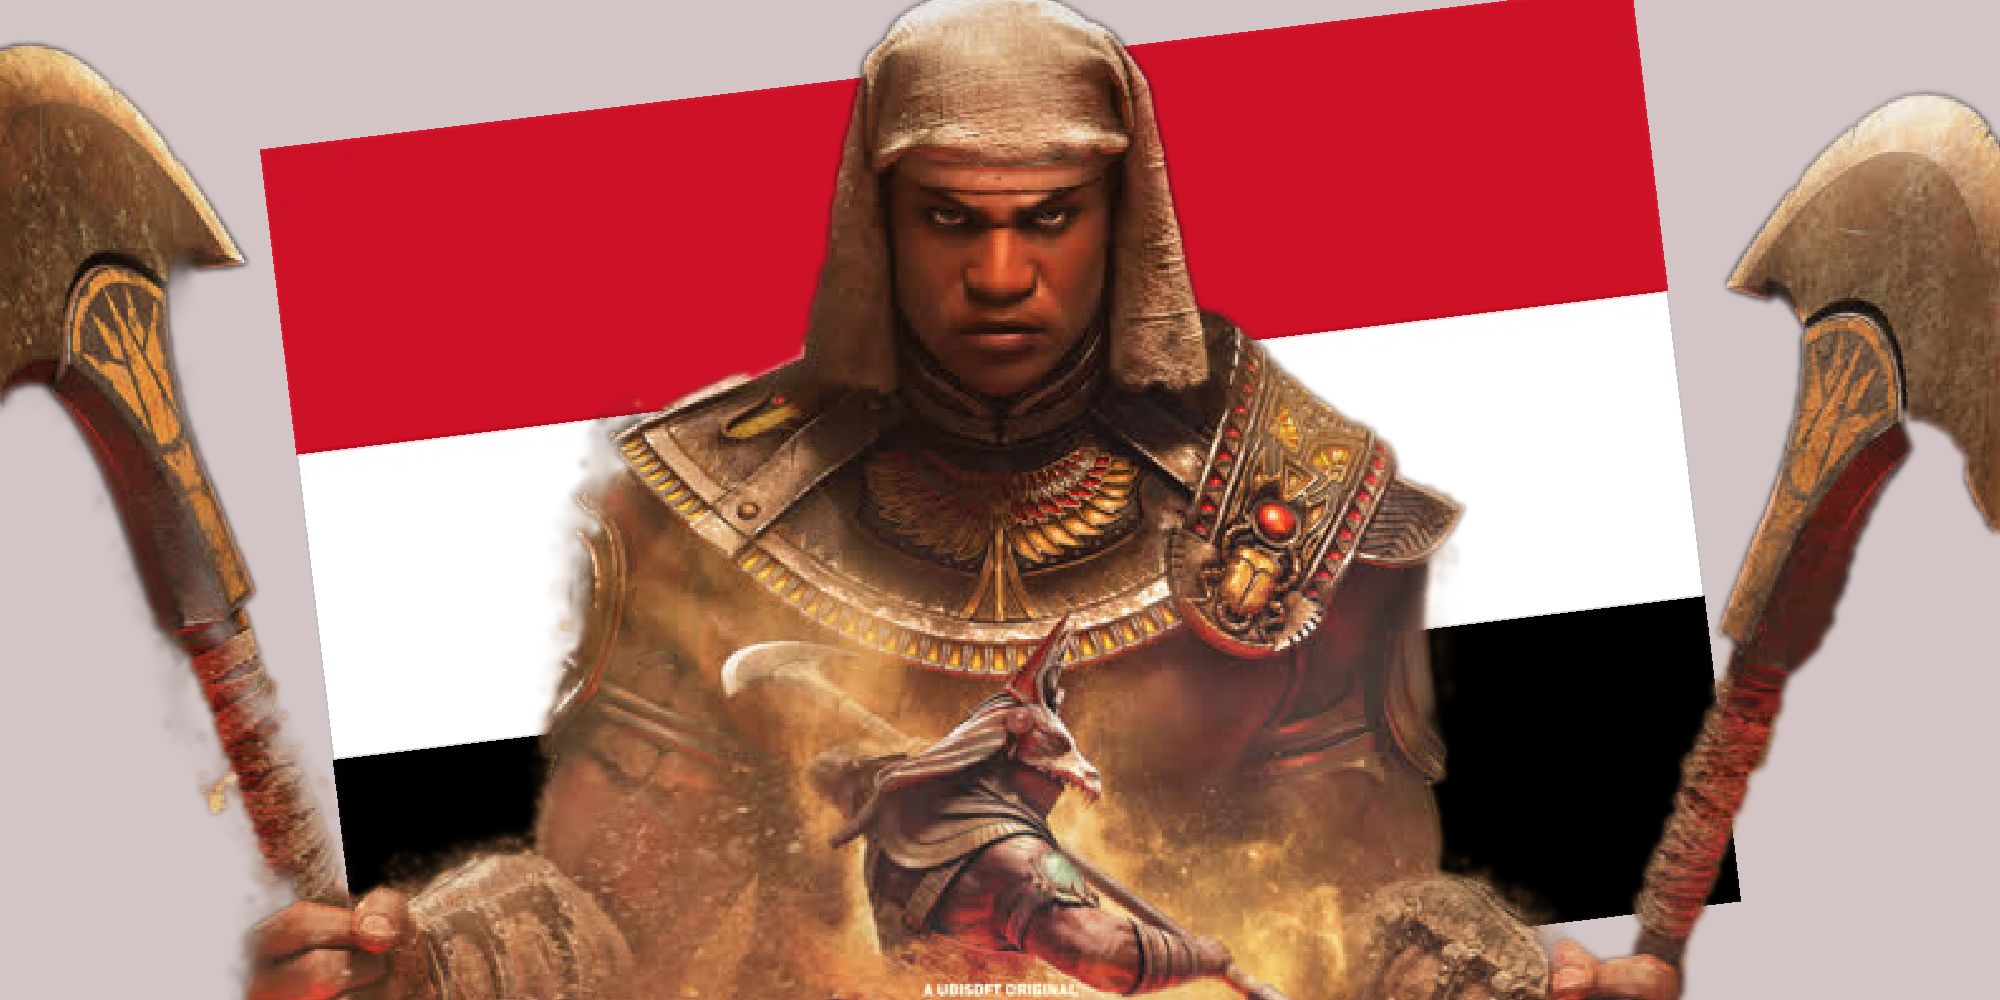 For Honor's Neferkha the Medjay holding two axes in front of the egyptian flag